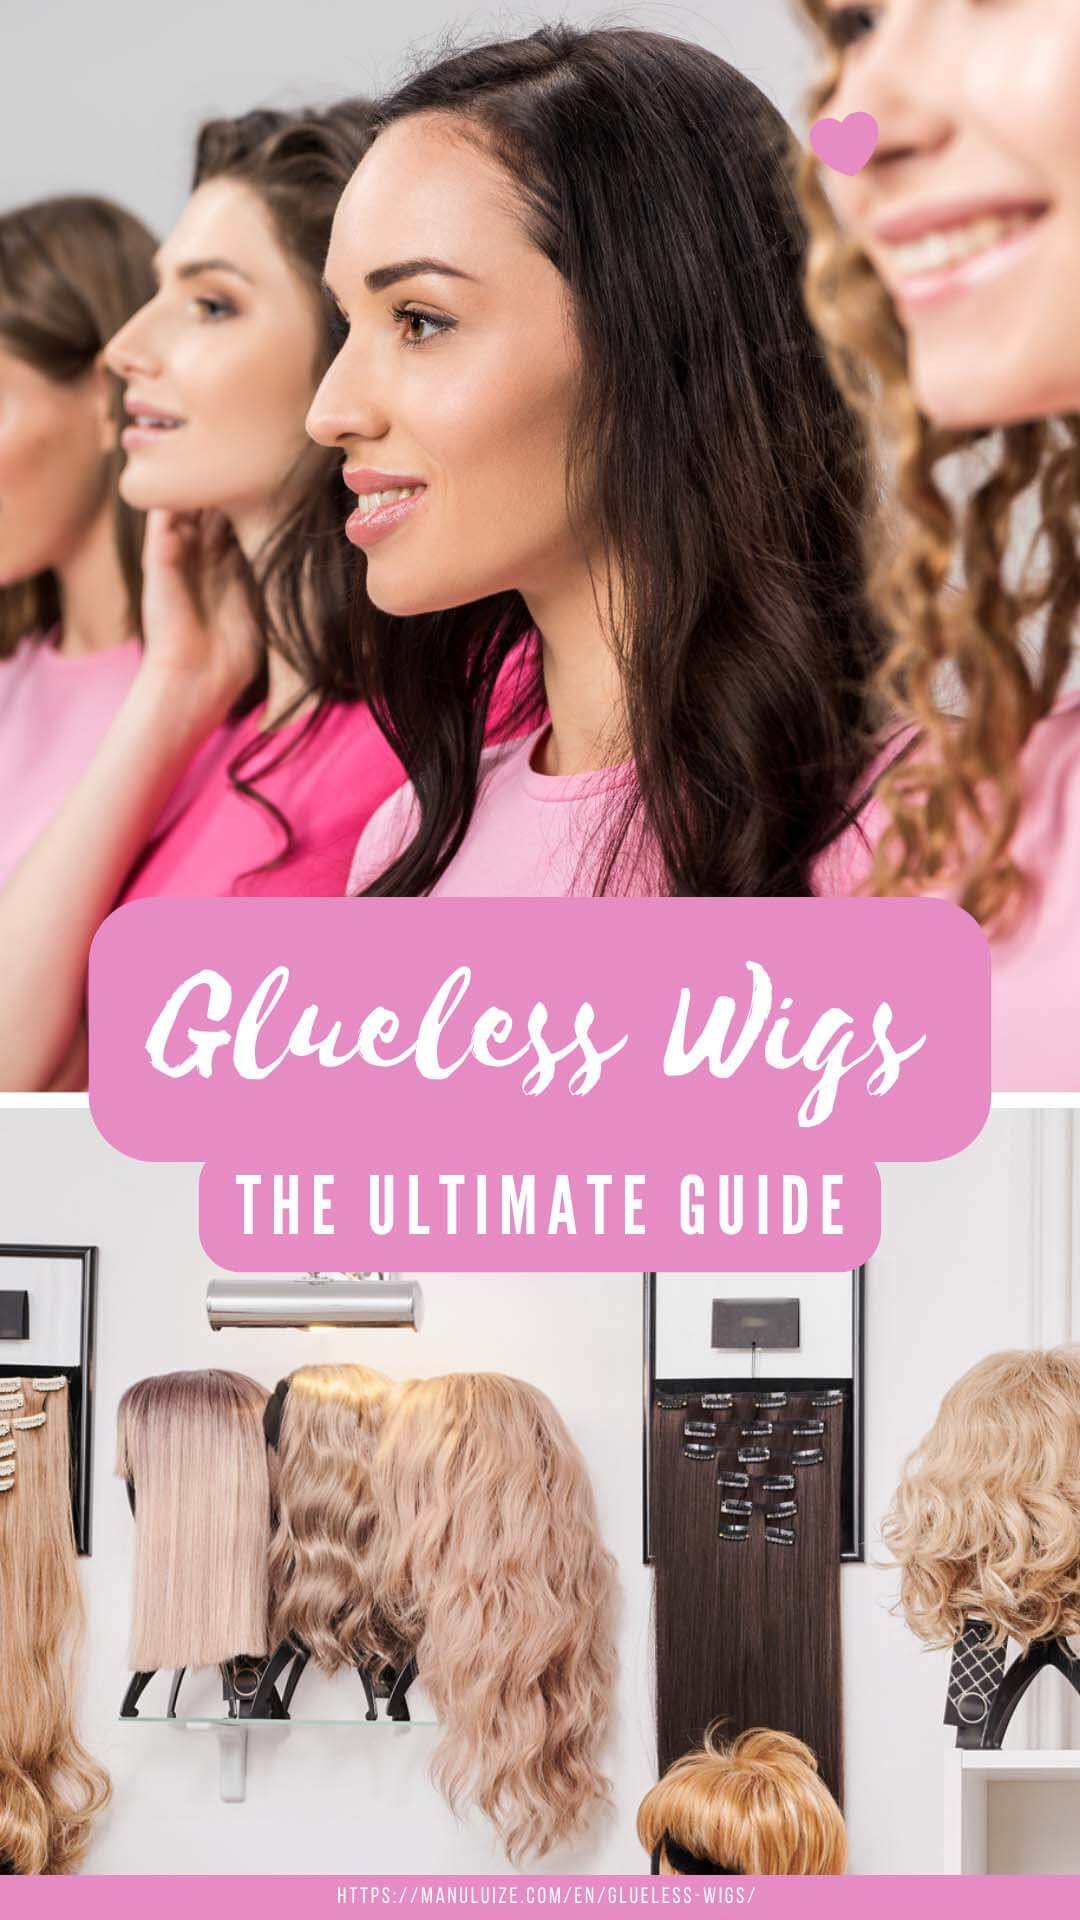 Glueless Wigs: The Ultimate Guide